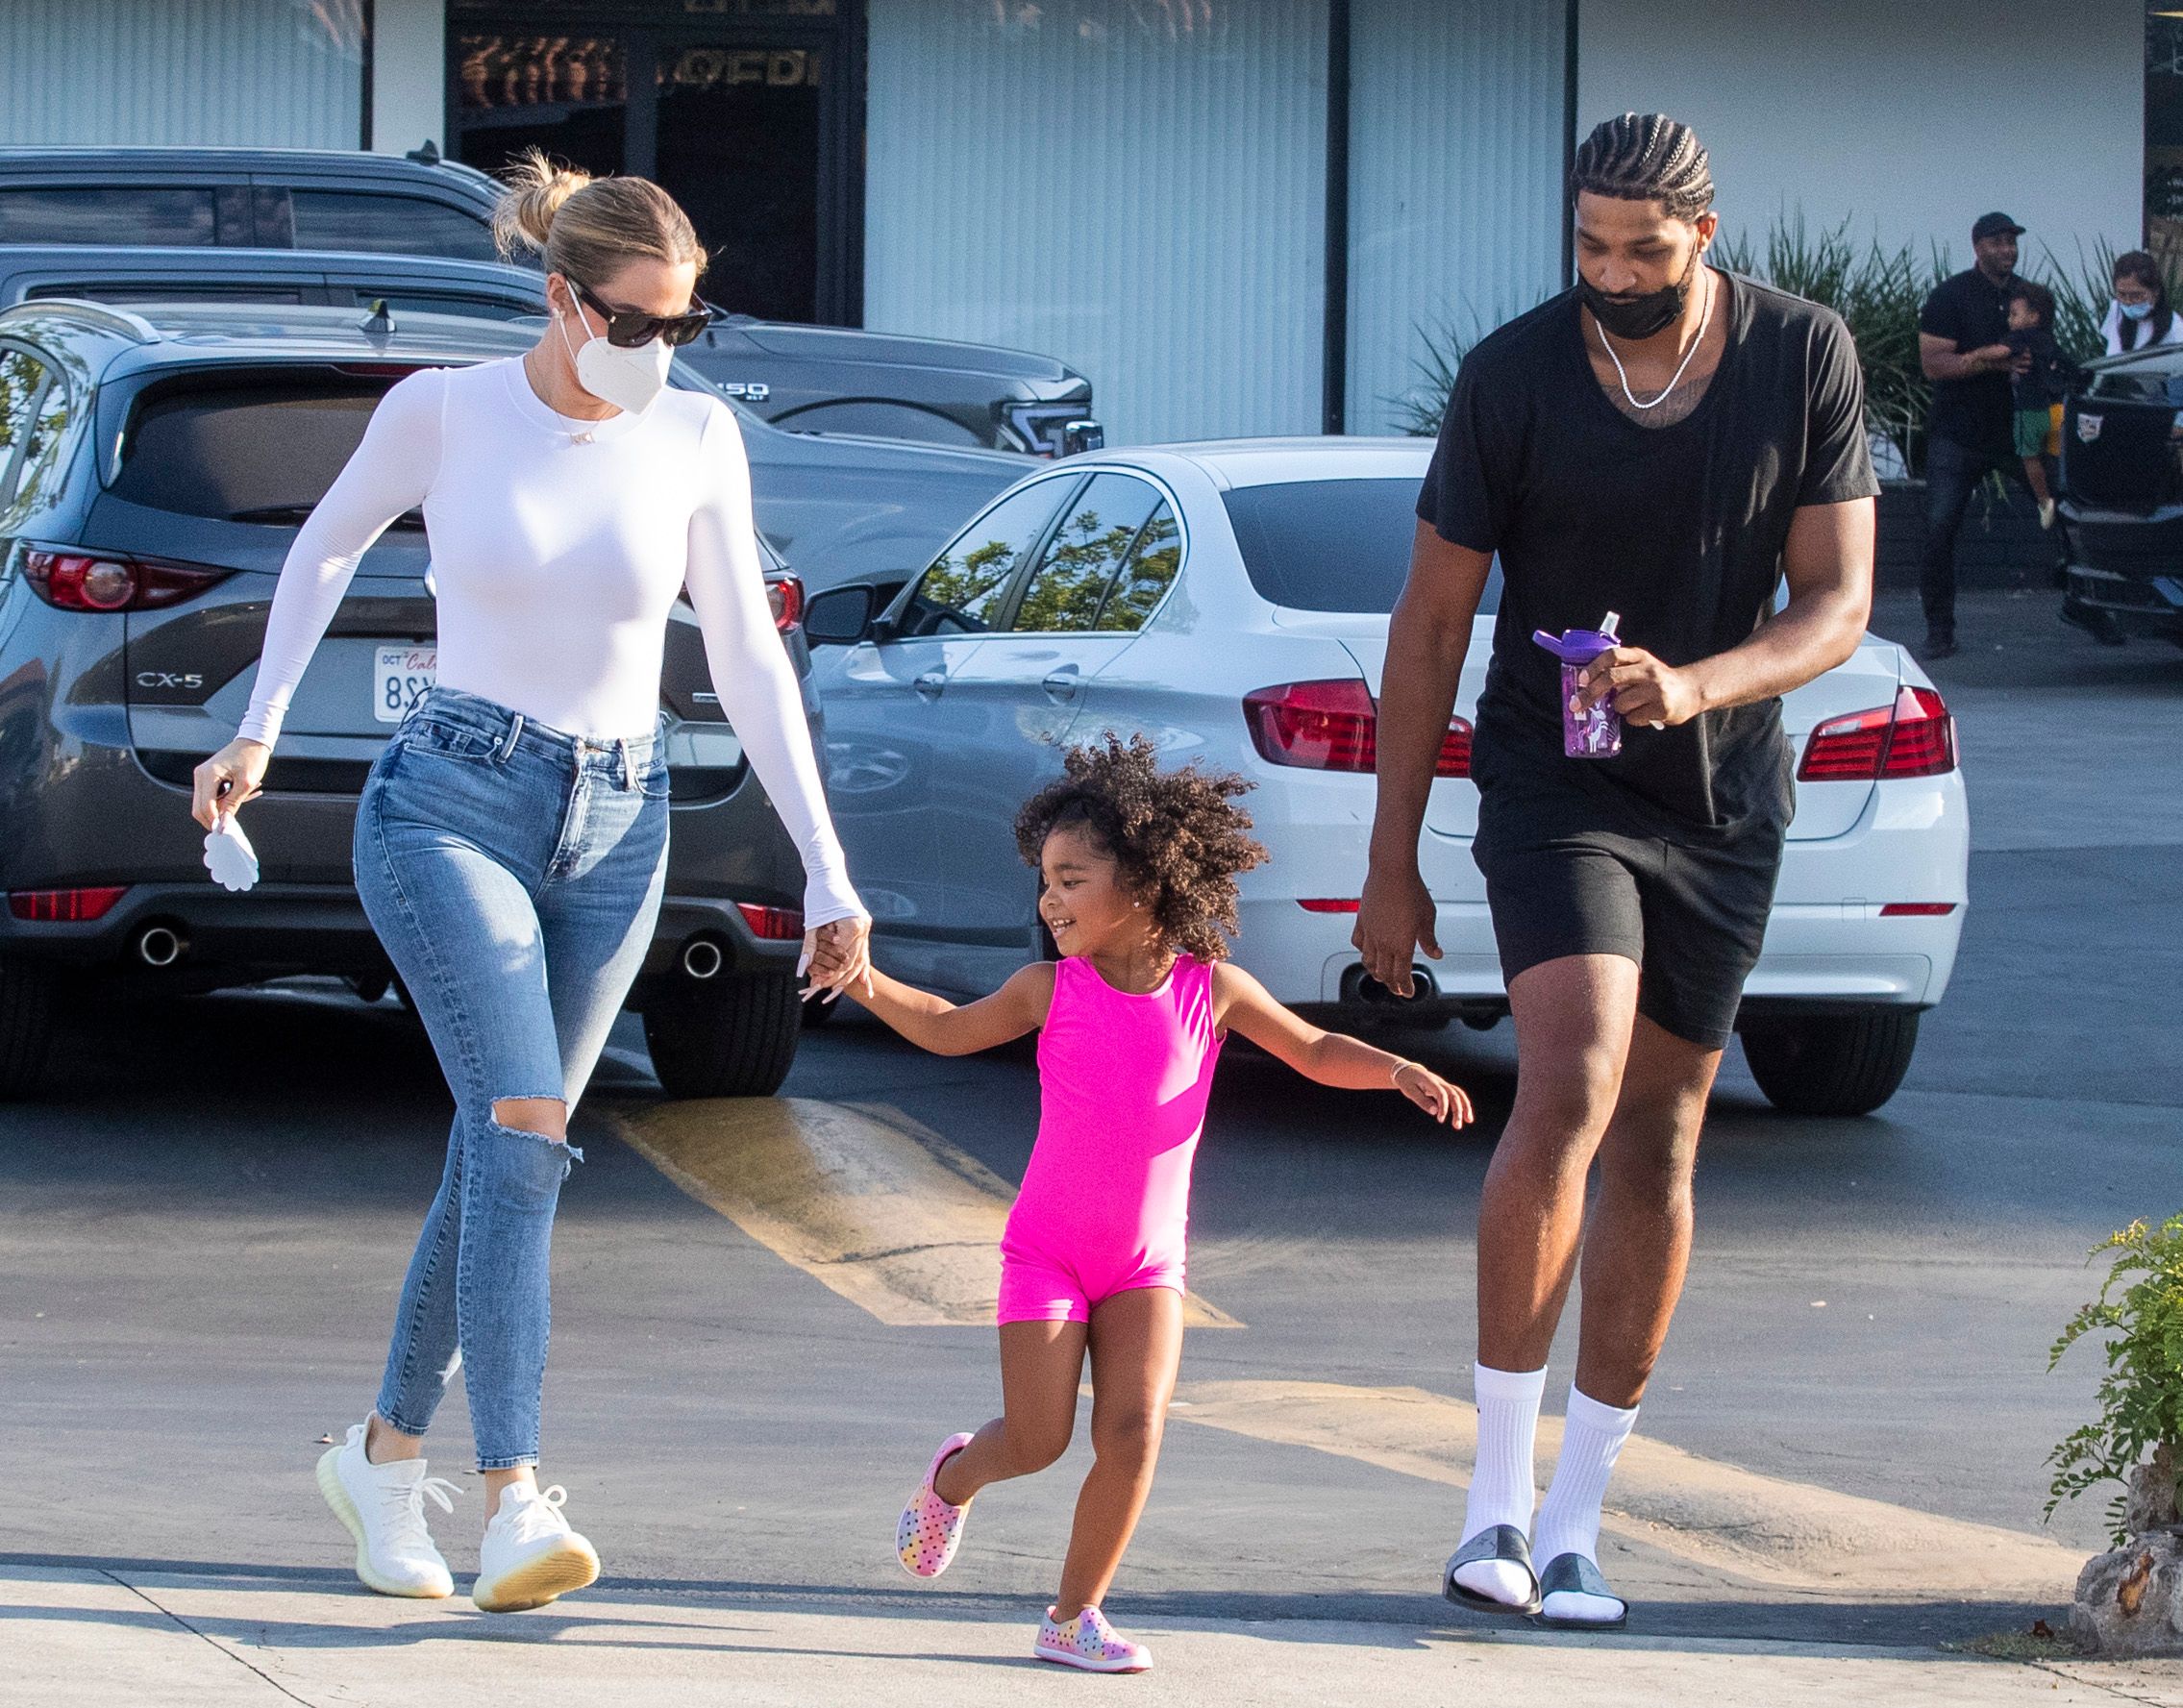 <p>On Dec. 3, 2021, <a href="https://www.dailymail.co.uk/news/article-10231447/Tristan-Thompson-expecting-child-Texas-personal-trainer.html">DailyMail.com</a> cited court documents revealing that NBA star Tristan Thompson was being sued by Maralee Nichols, a former personal trainer who alleged her son born on Dec. 1 was conceived on the athlete's 30th birthday in March 2021 -- when he was still dating <a href="https://www.wonderwall.com/celebrity/profiles/overview/khloe-kardashian-622.article">Khloe Kardashian</a>, with whom he shares daughter True (pictured). Tristan, of course, has blown up Khloe's life with a handful of previous cheating scandals (more on those coming up). In a declaration, the basketball star acknowledged having sex with Maralee at a hotel after they attended a party together -- a time during which Tristan and Khloe were a couple (they reconciled in 2020 after she forgave him for previous infidelities). He initially said that night was the only time he and Maralee were intimate but later confessed that wasn't true, confirming her claims they had a lengthy affair. Court filings also revealed texts exchanged between the two in which Tristan appeared to tell Maralee he "won't be involved" in the child's life, urged her to <a href="https://www.wonderwall.com/news/tristan-thompson-allegedly-urged-mistress-to-get-abortion-530967.article">get an abortion</a> and offered her $75,000 to move on. On Jan. 3, 2022, Tristan publicly confirmed paternity — and apologized to Khloe. "Today, paternity test results reveal that I fathered a child with Maralee Nichols. I take full responsibility for my actions. Now that paternity has been established I look forward to amicably raising our son. I sincerely apologize to everyone I've hurt or disappointed throughout this ordeal both publicly and privately," he wrote on his Instagram Story, adding, "Khloe, you don't deserve this. You don't deserve the heartache and humiliation I have caused you. You don't deserve the way I have treated you over the years. My actions certainly have not lined up with the way I view you. I have the utmost respect and love for you. Regardless of what you may think. Again, I am so incredibly sorry."</p>